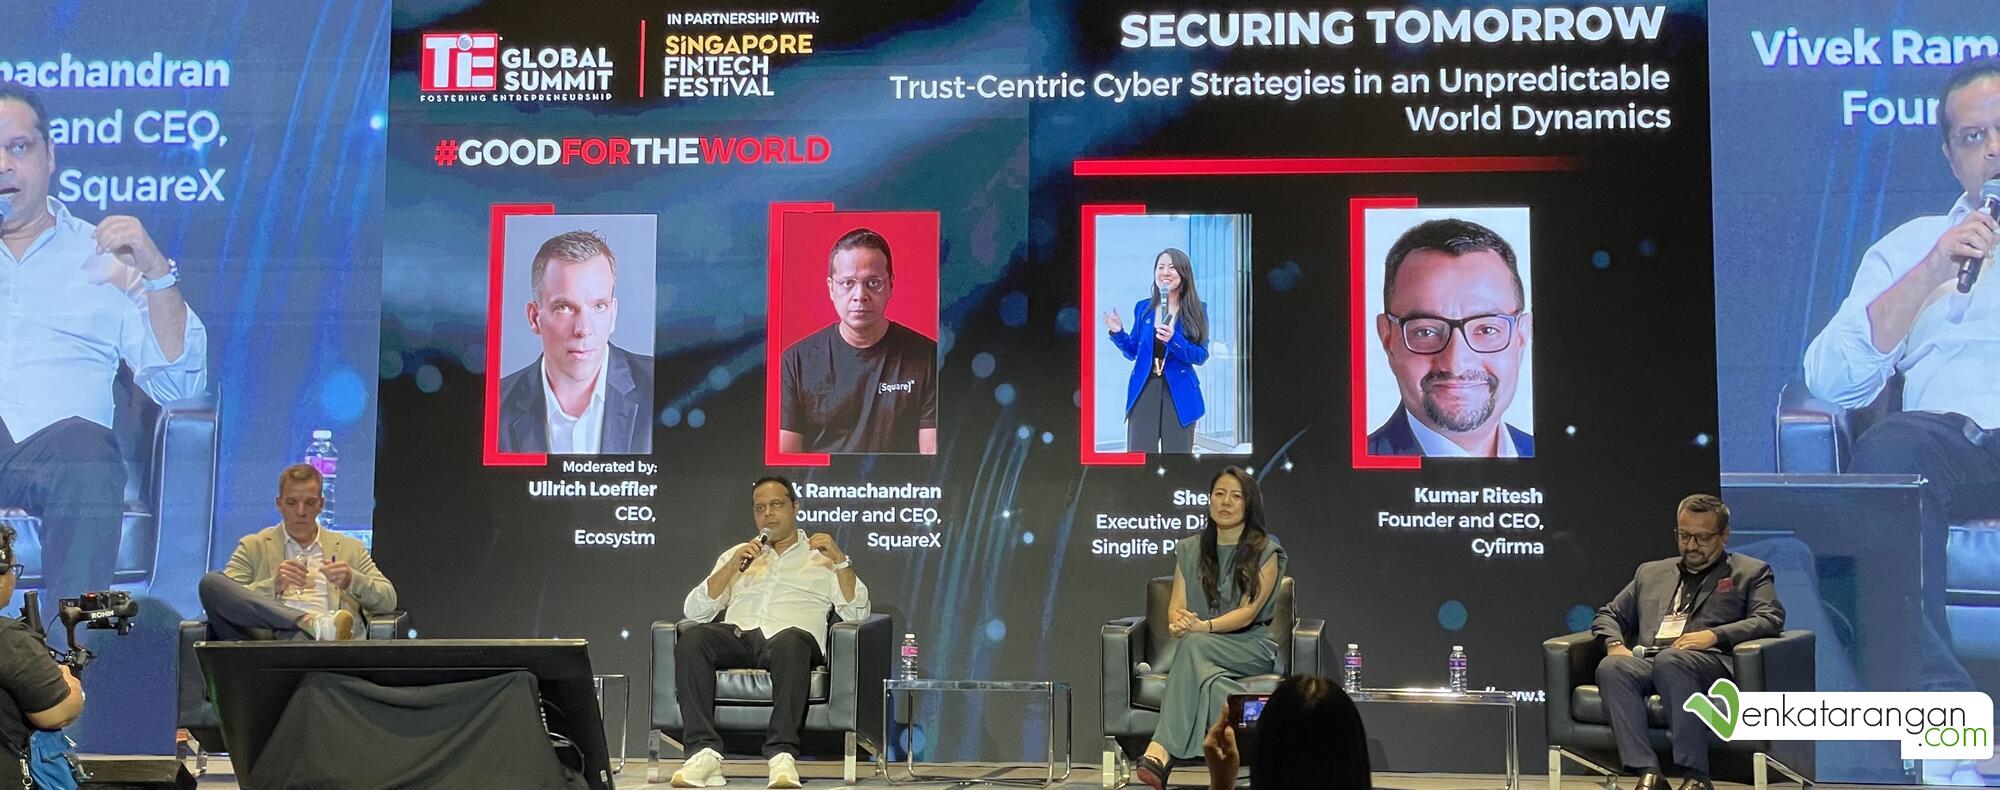 Securing Tomorrow: Trust-Centric Cyber Strategies in an unpredictable world dynamics - Ullrich Loeffler of Ecosystm, Vivek Ramachandran of SquareX, Sherie Ng of Singlife Philippines and Kumar Ritesh of Cyfirma